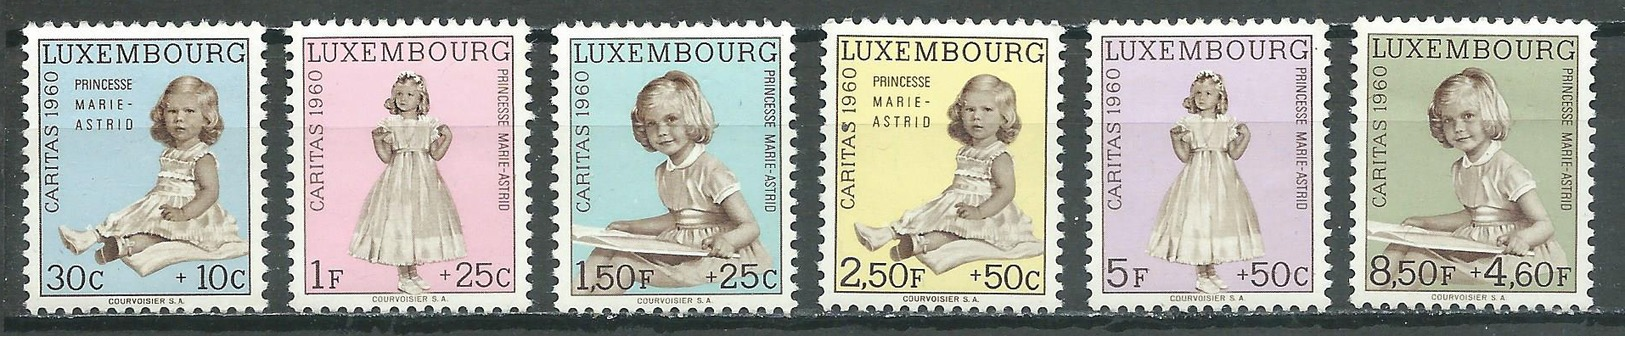 Luxembourg YT N°589/594 Caritas 1960 Neuf/charnière * - Ungebraucht